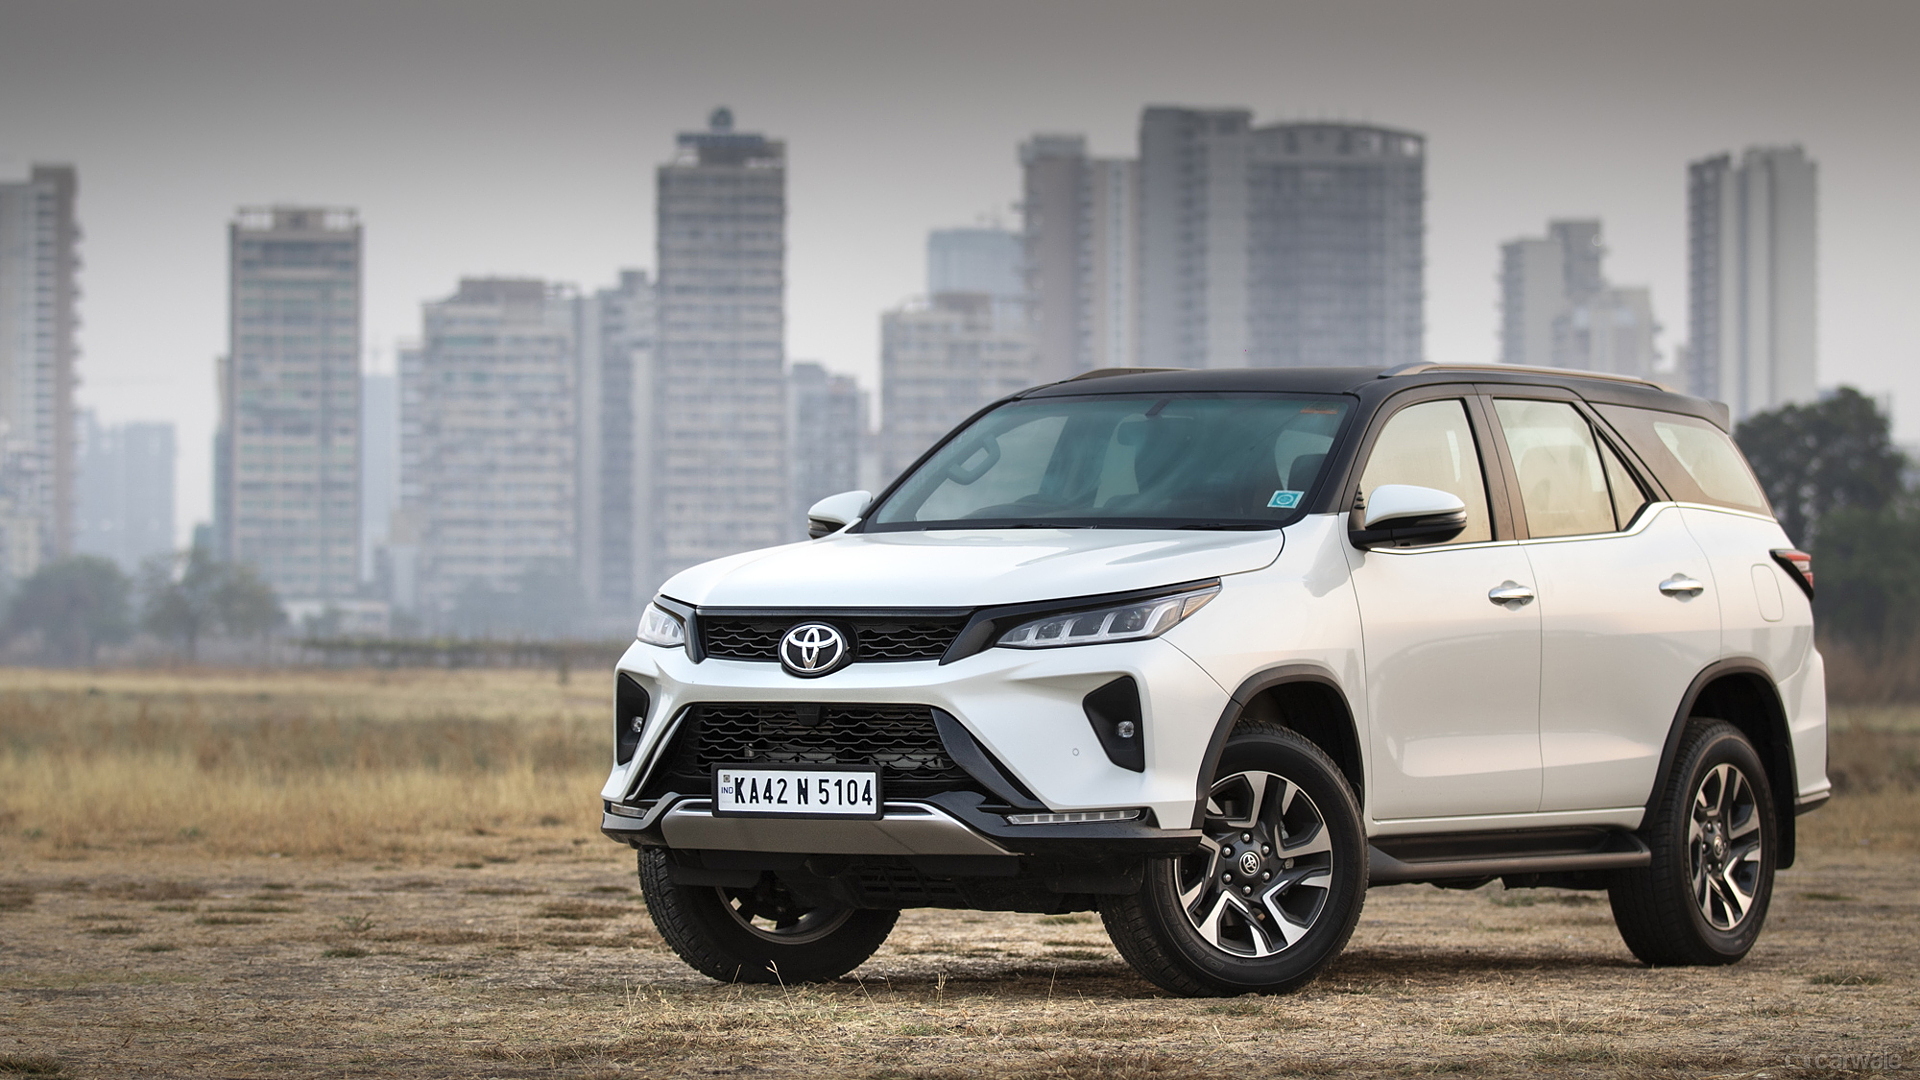 Toyota Fortuner Image & Exterior Photo Gallery [Images]